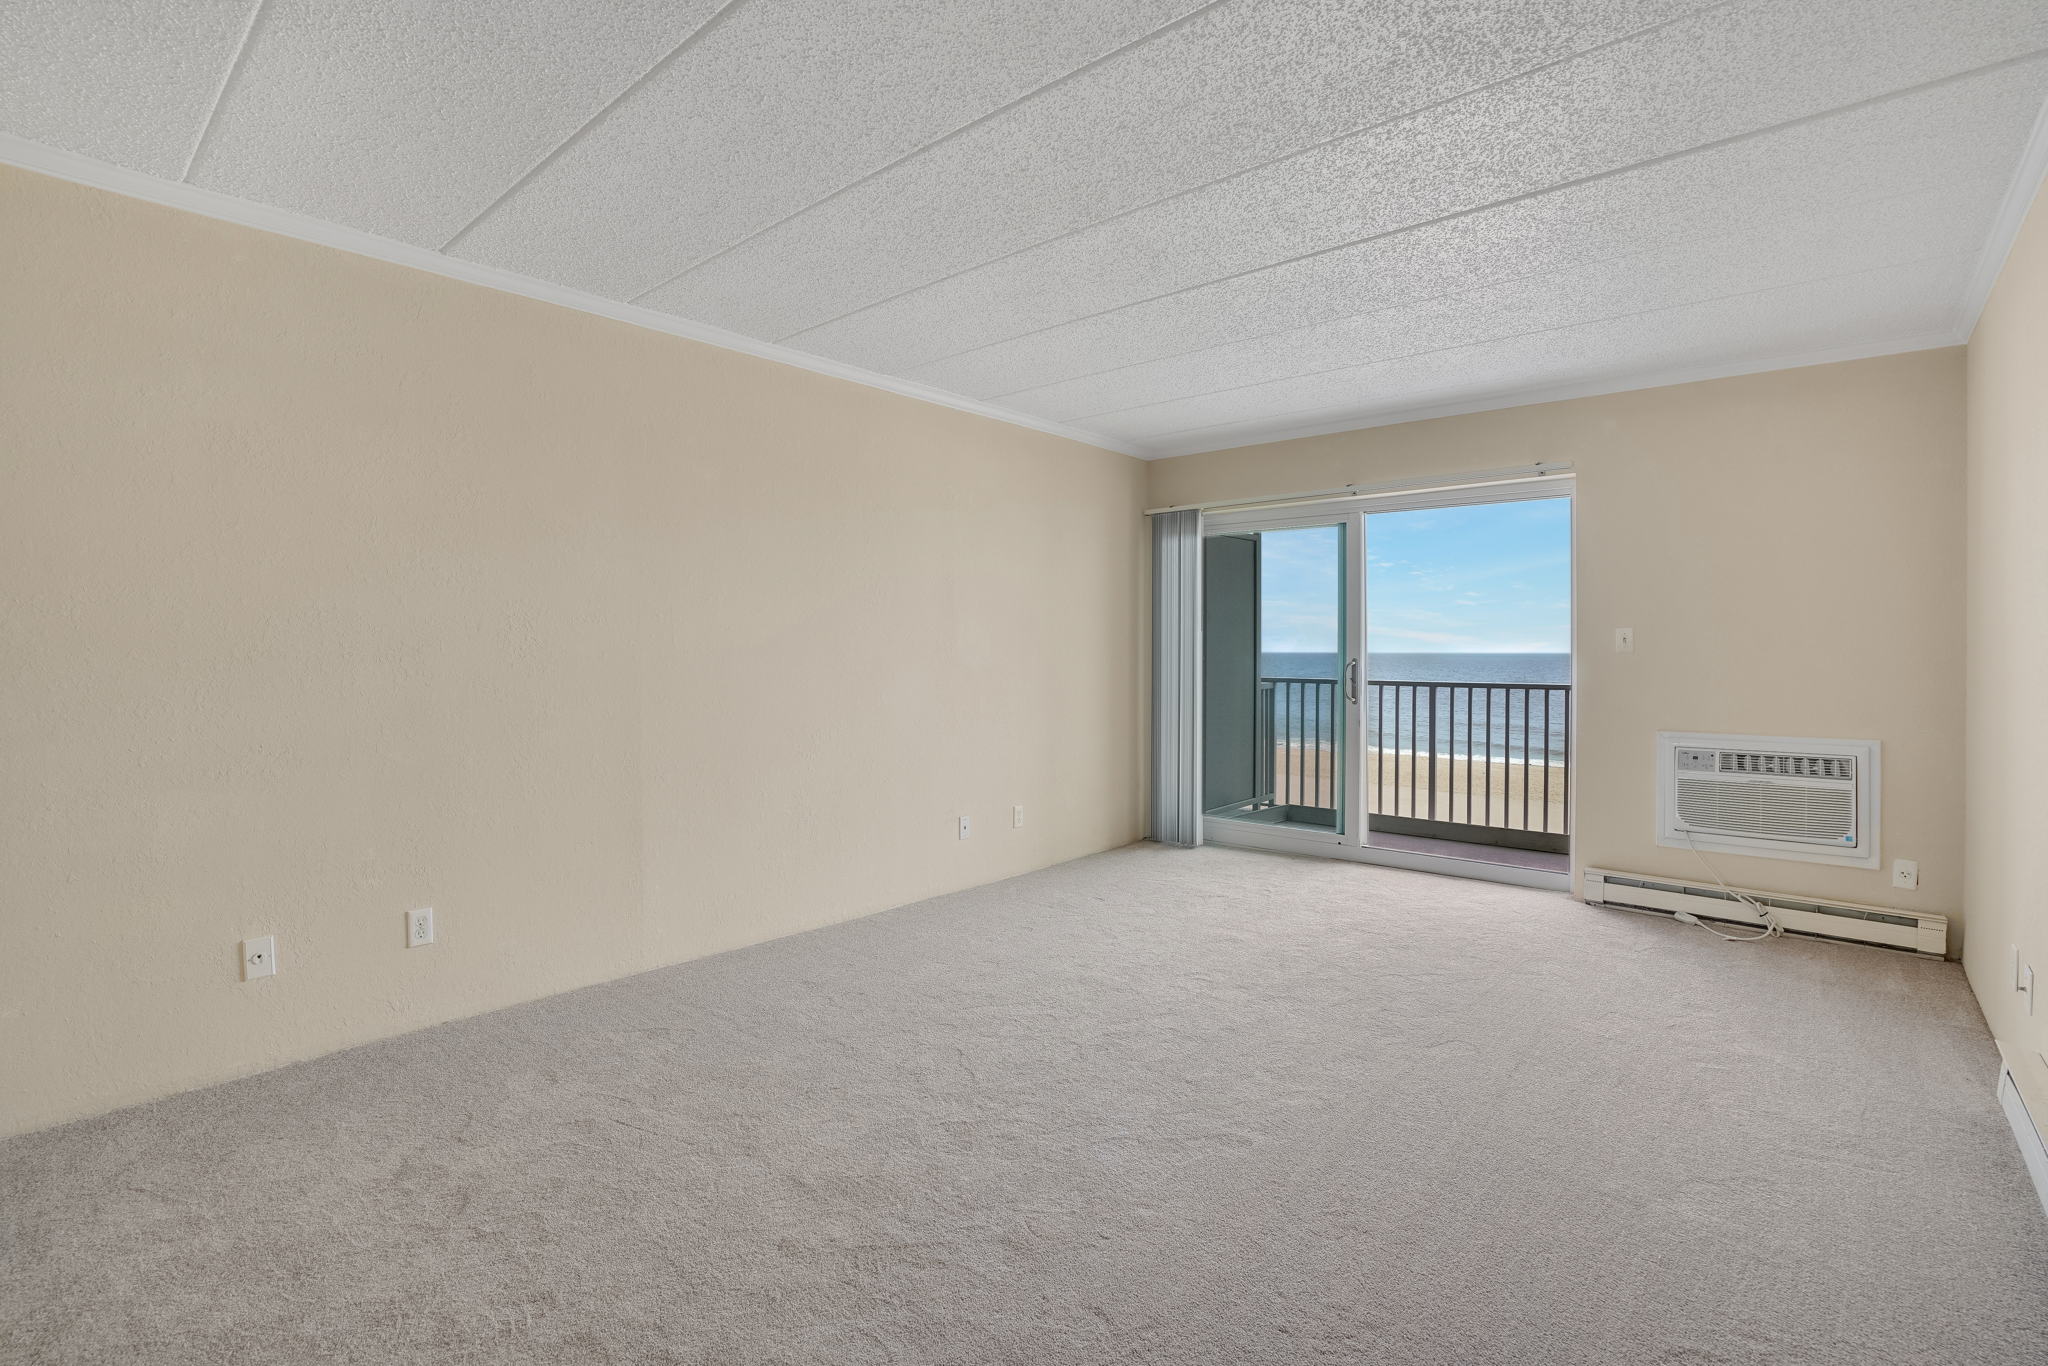 13800 Wight St, Ocean City, MD 21842, USA Photo 4